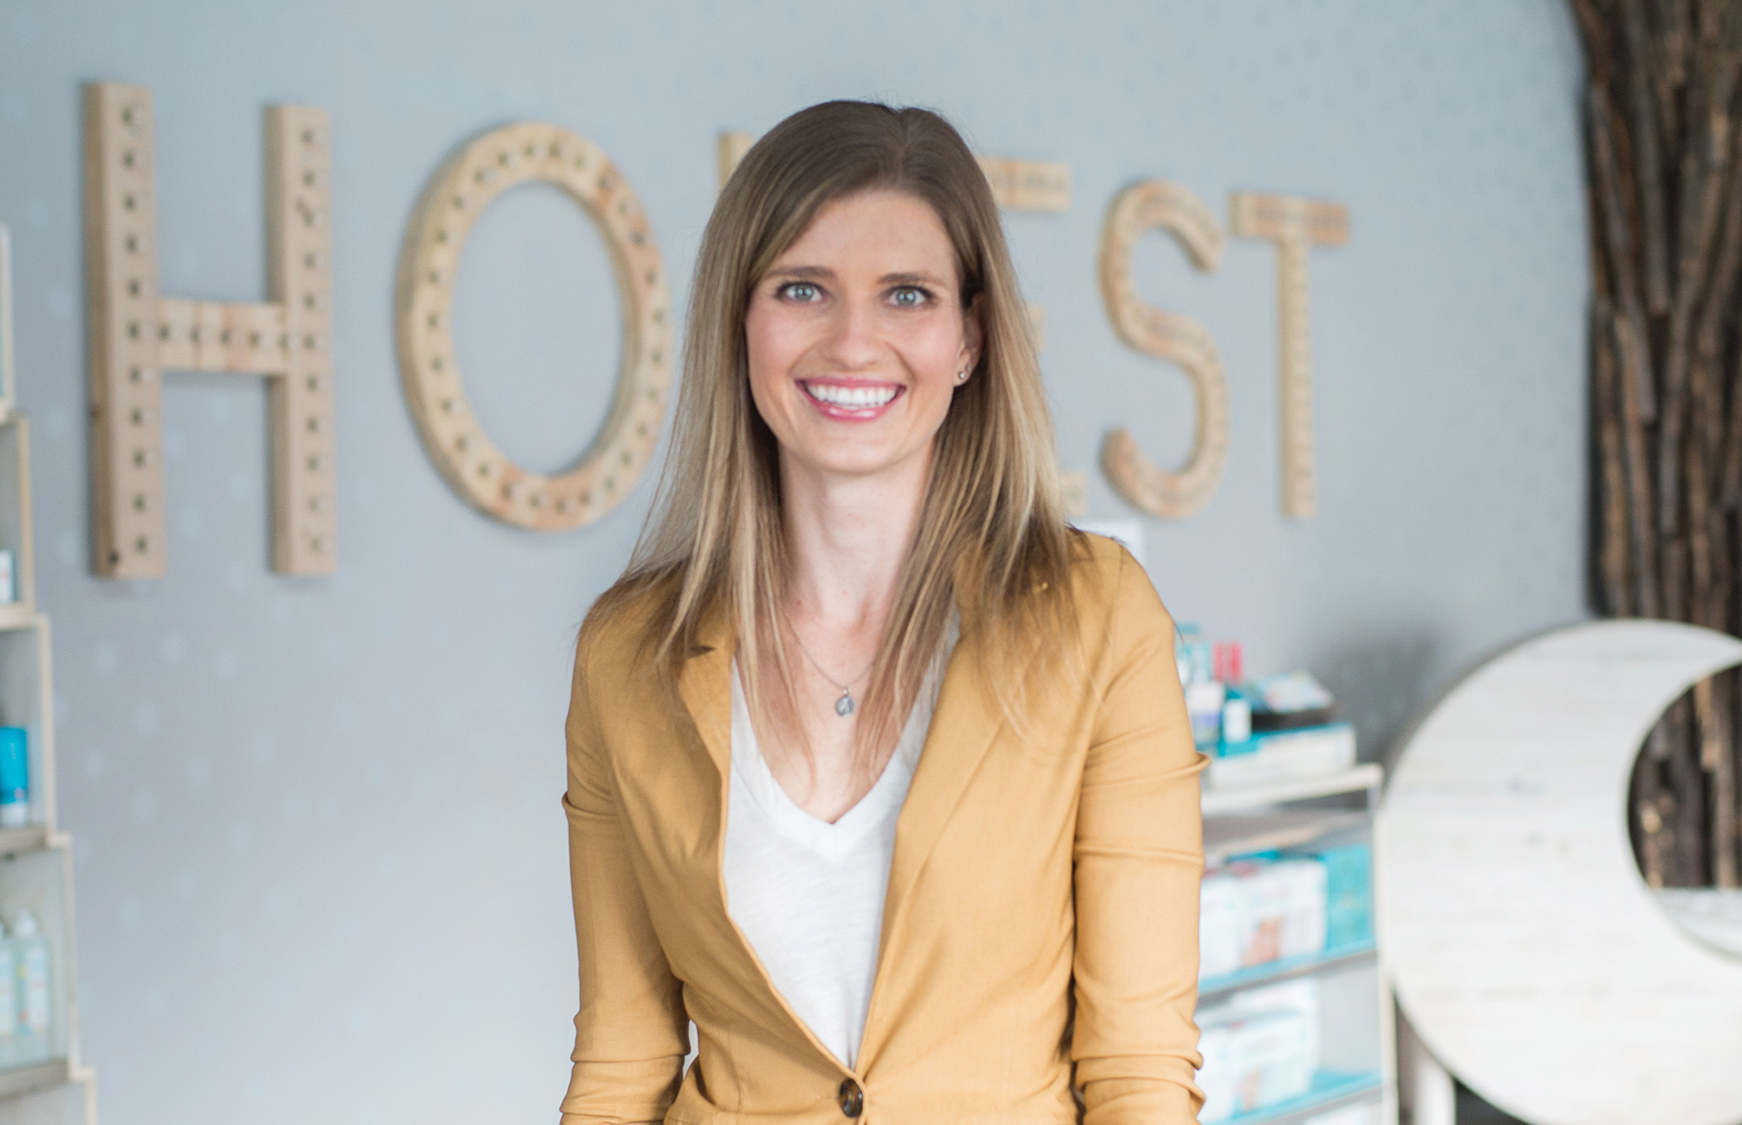 An Interview With Ashley King, Social Goodness Director for The Honest Comp Image